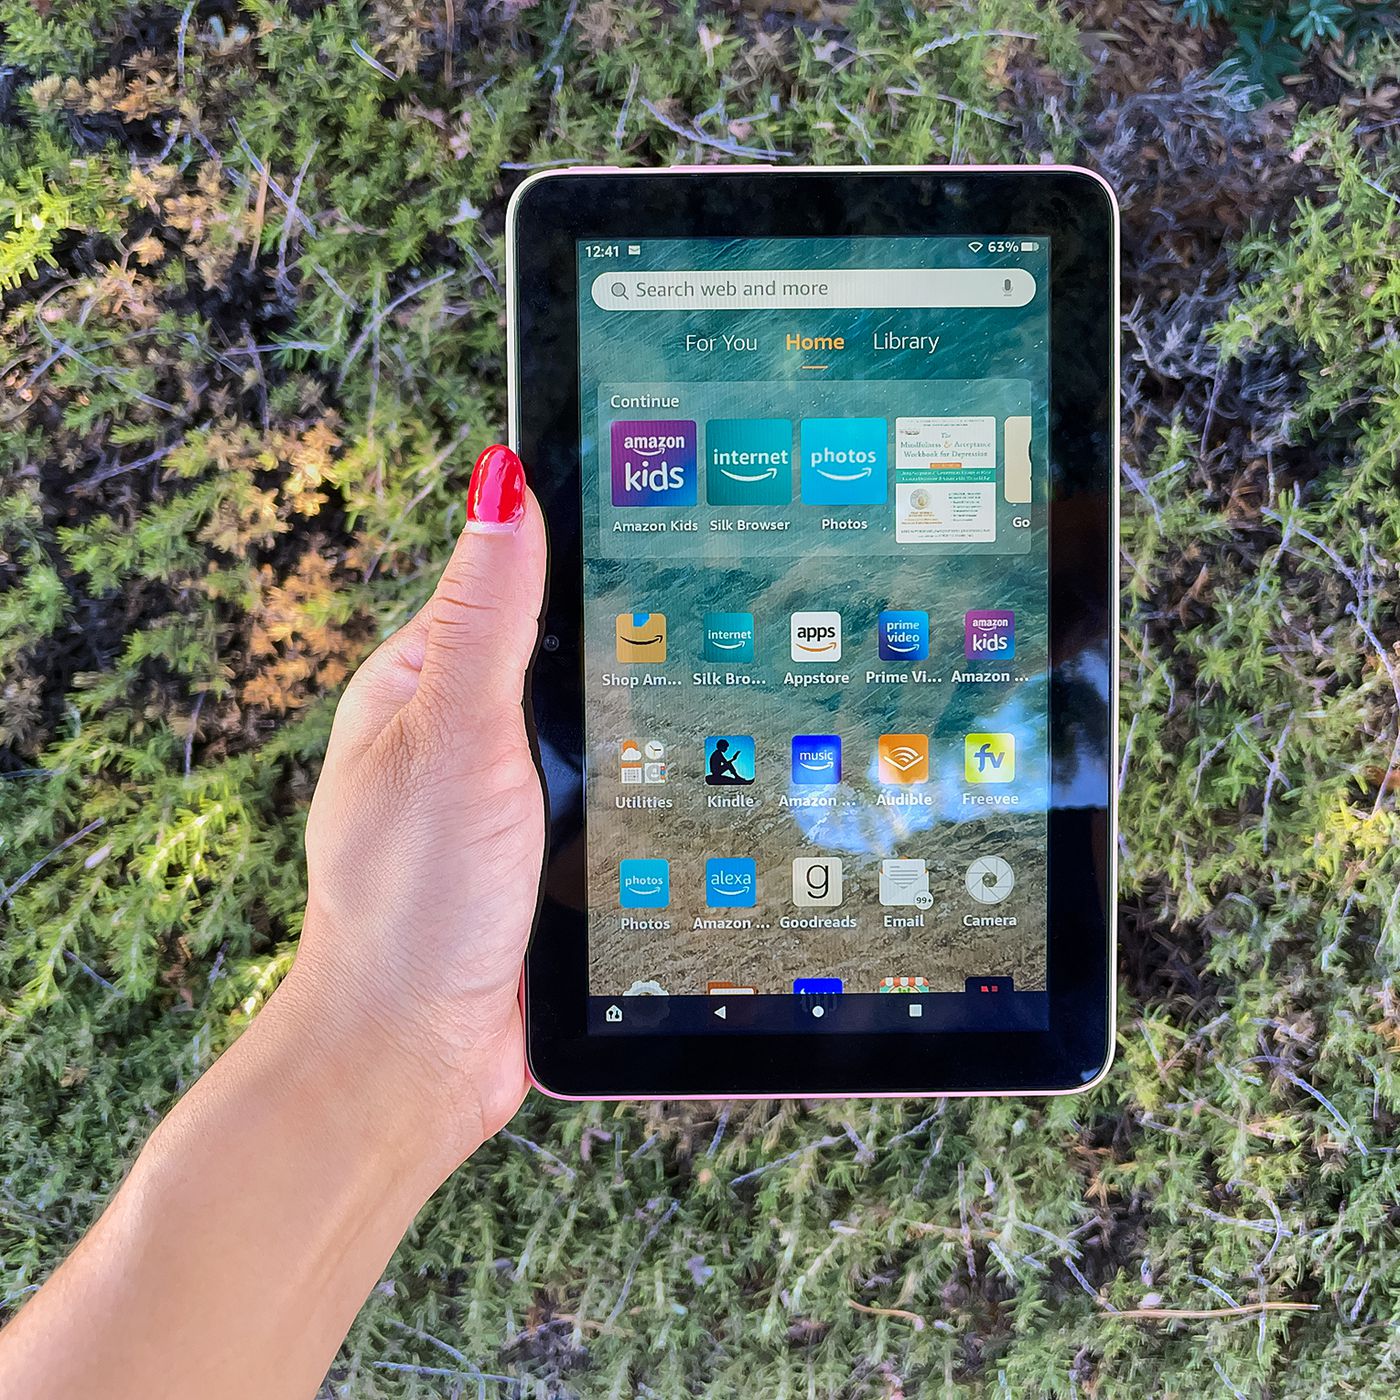 Amazon Fire 7 review: a budget tablet for the basics - The Verge (Picture 1)